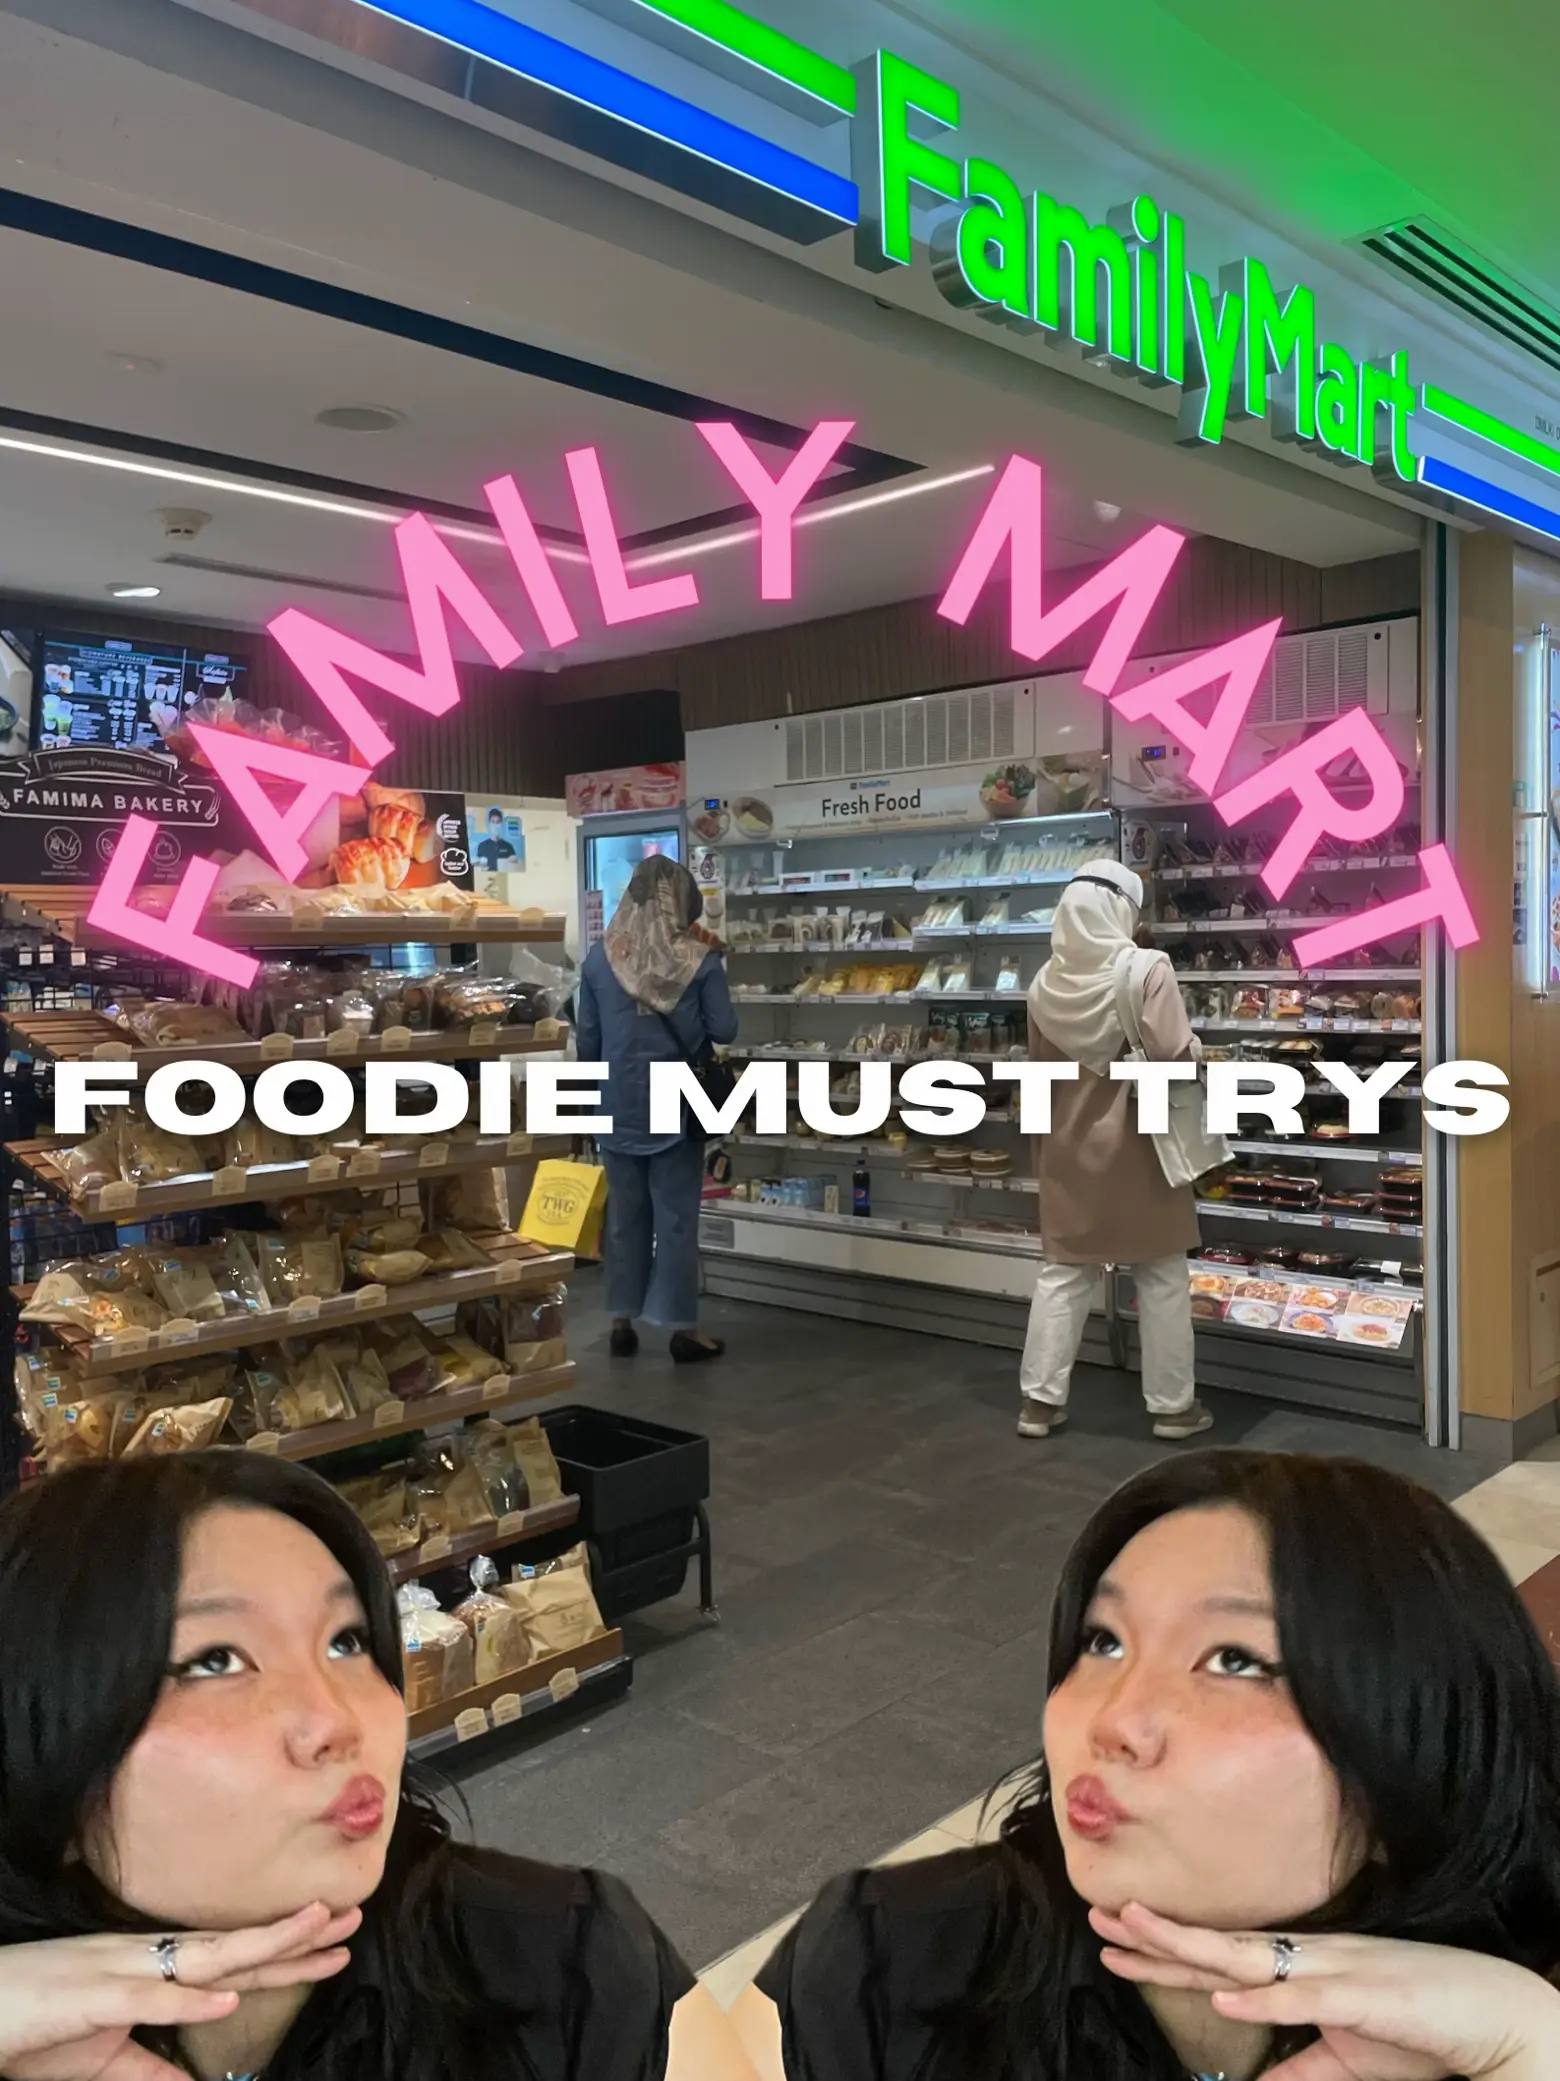 best food from Family Mart you need to try ASAP 😋's images(0)